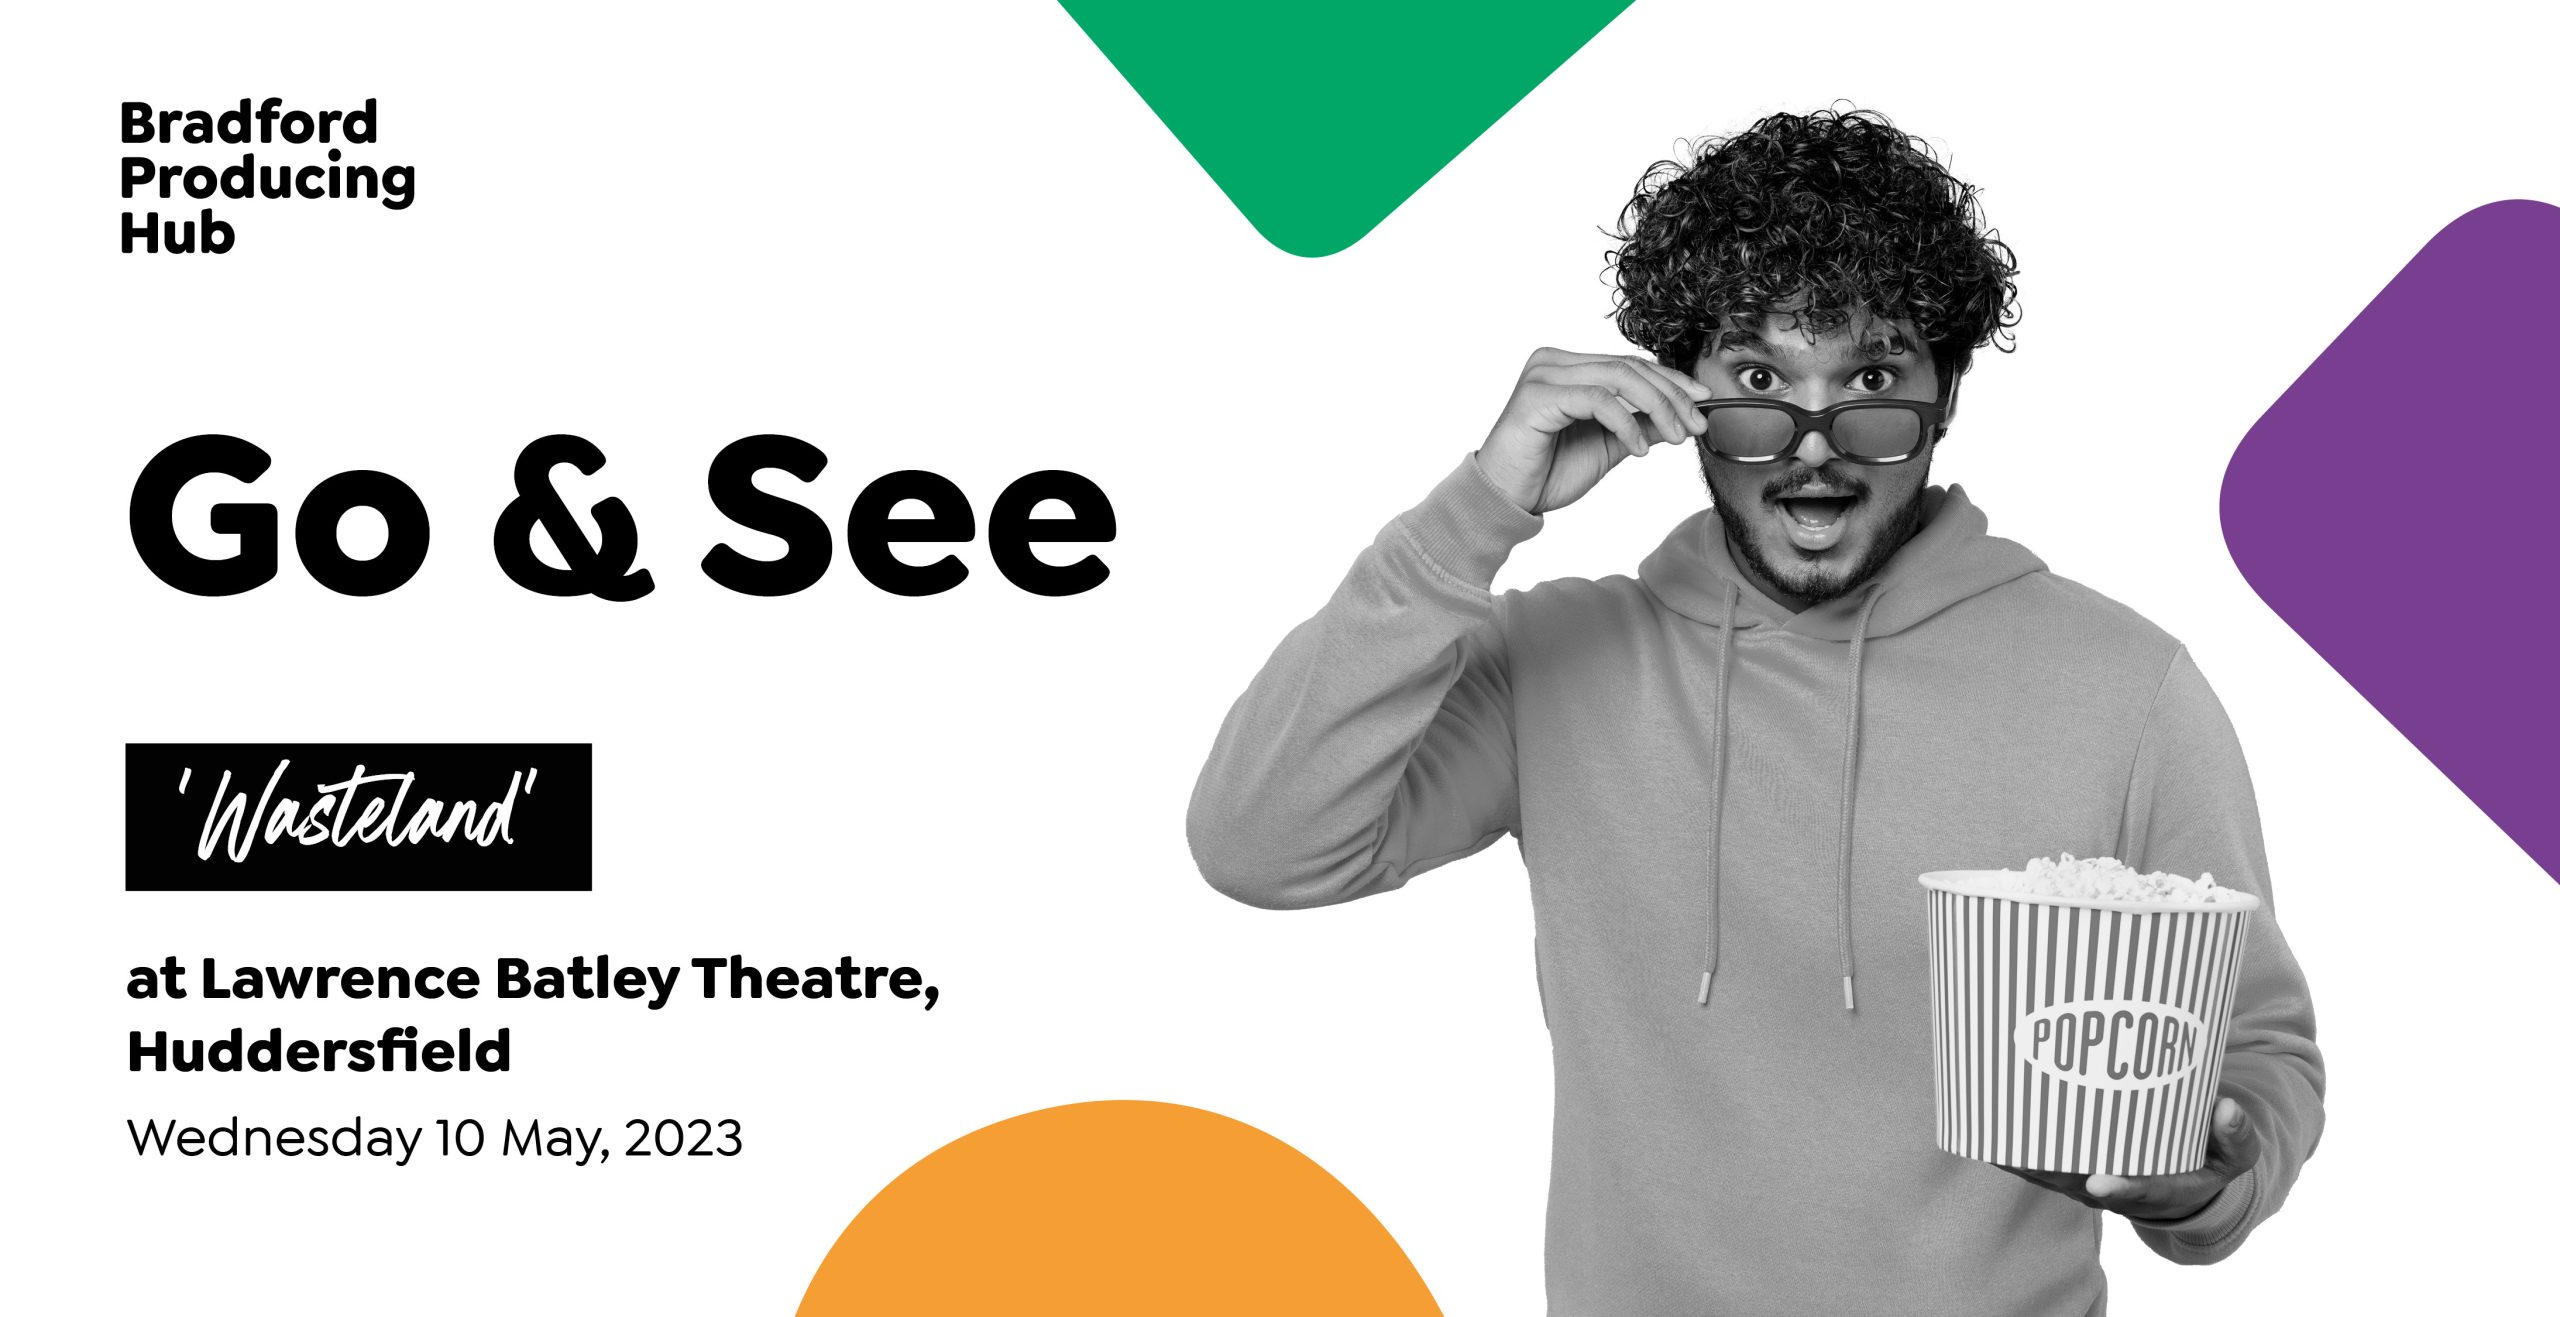 A man with dark curly hair and holding a container of popcorn peers over his glasses and looks animatedly to the camera. The text reads "Go and See Wasteland at Lawrence Batley Theatre on Wednesday 10 May 2023